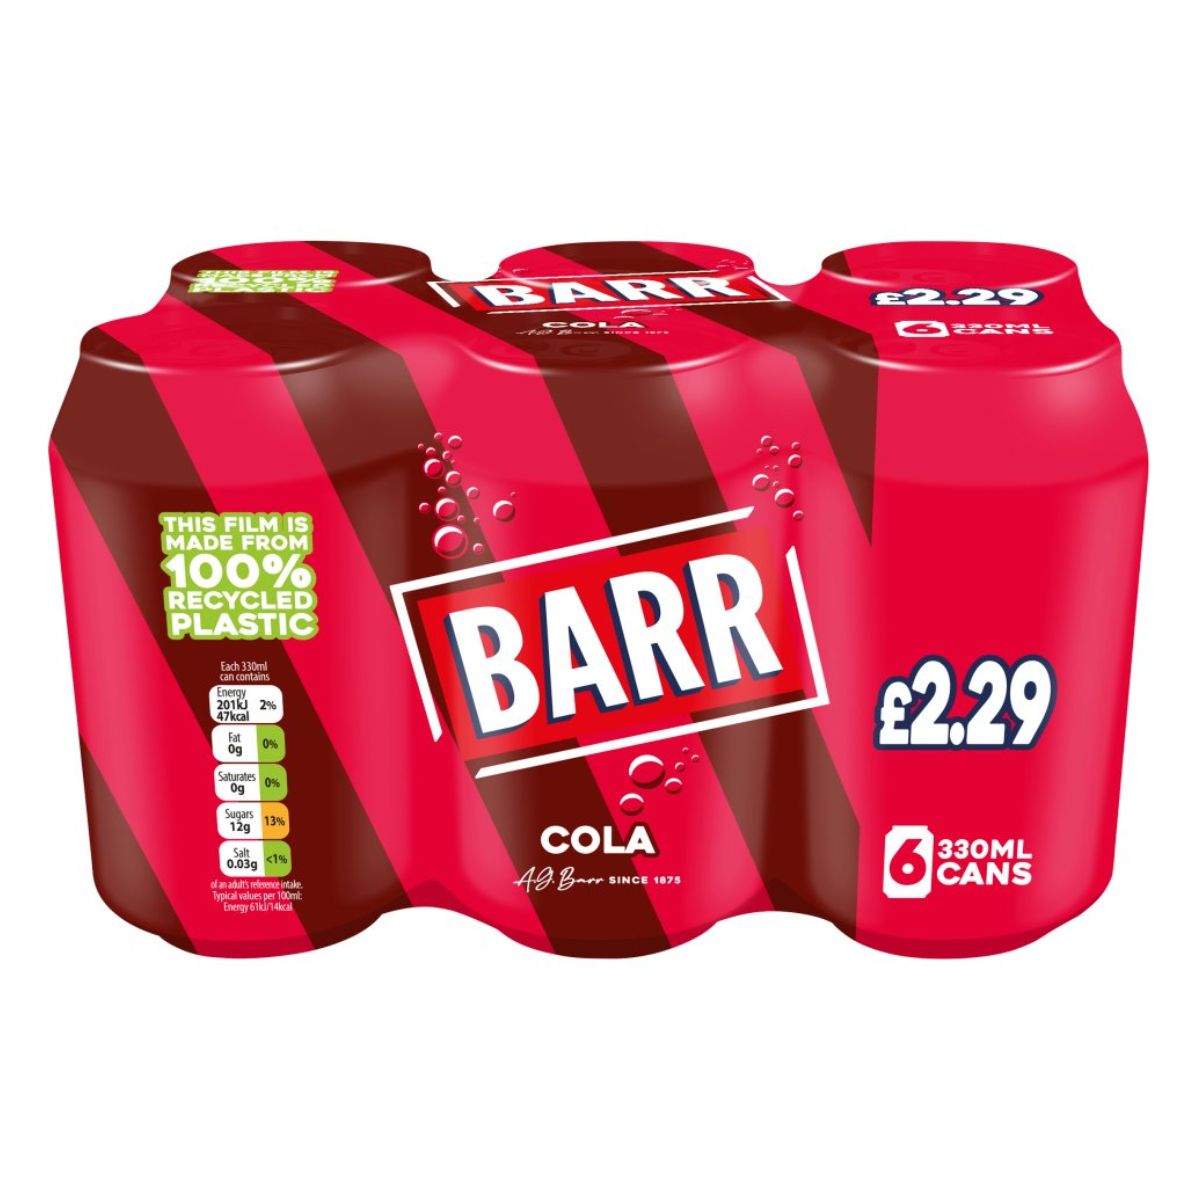 Four packs of Barr - Cola - 6x330ml on a white background.